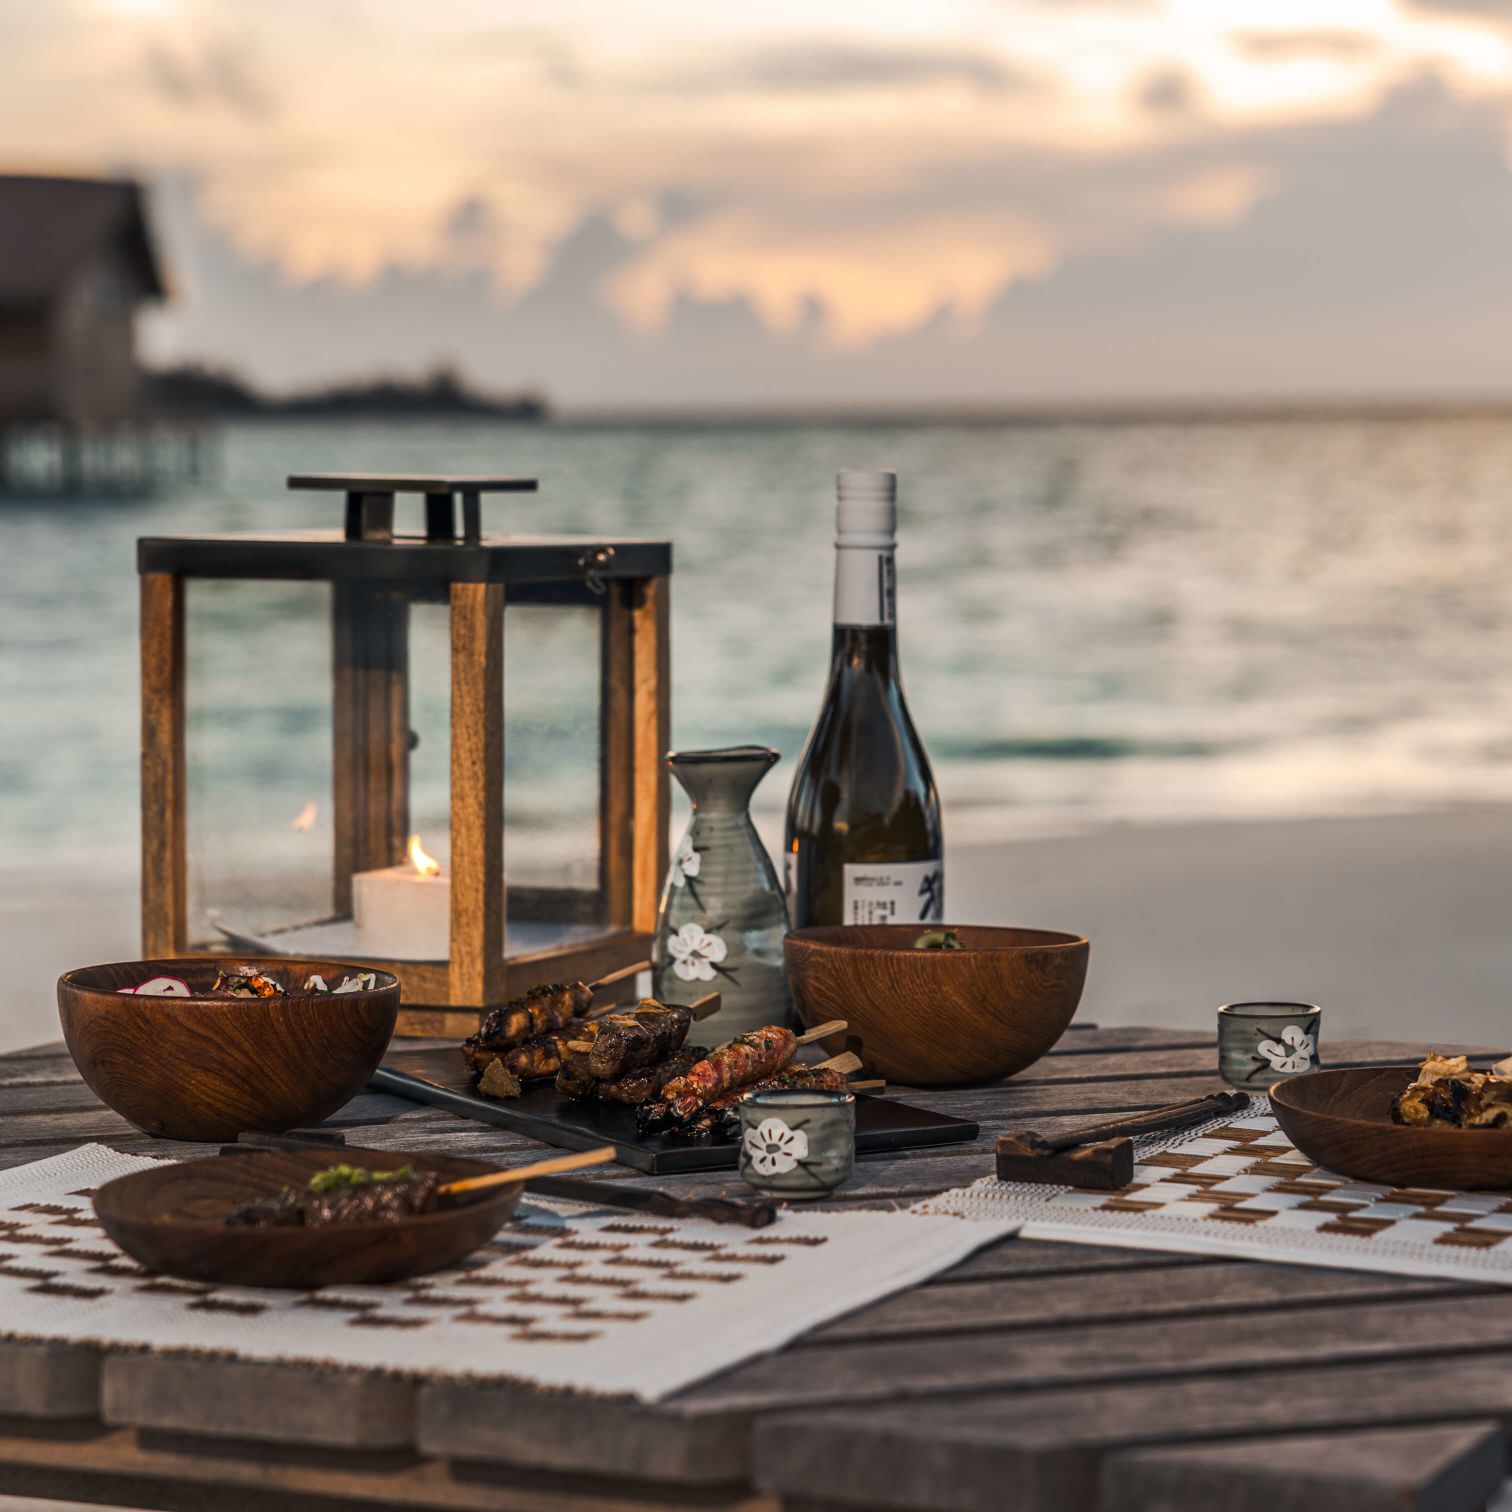 A Table With Food And Drinks On It By A Body Of Water